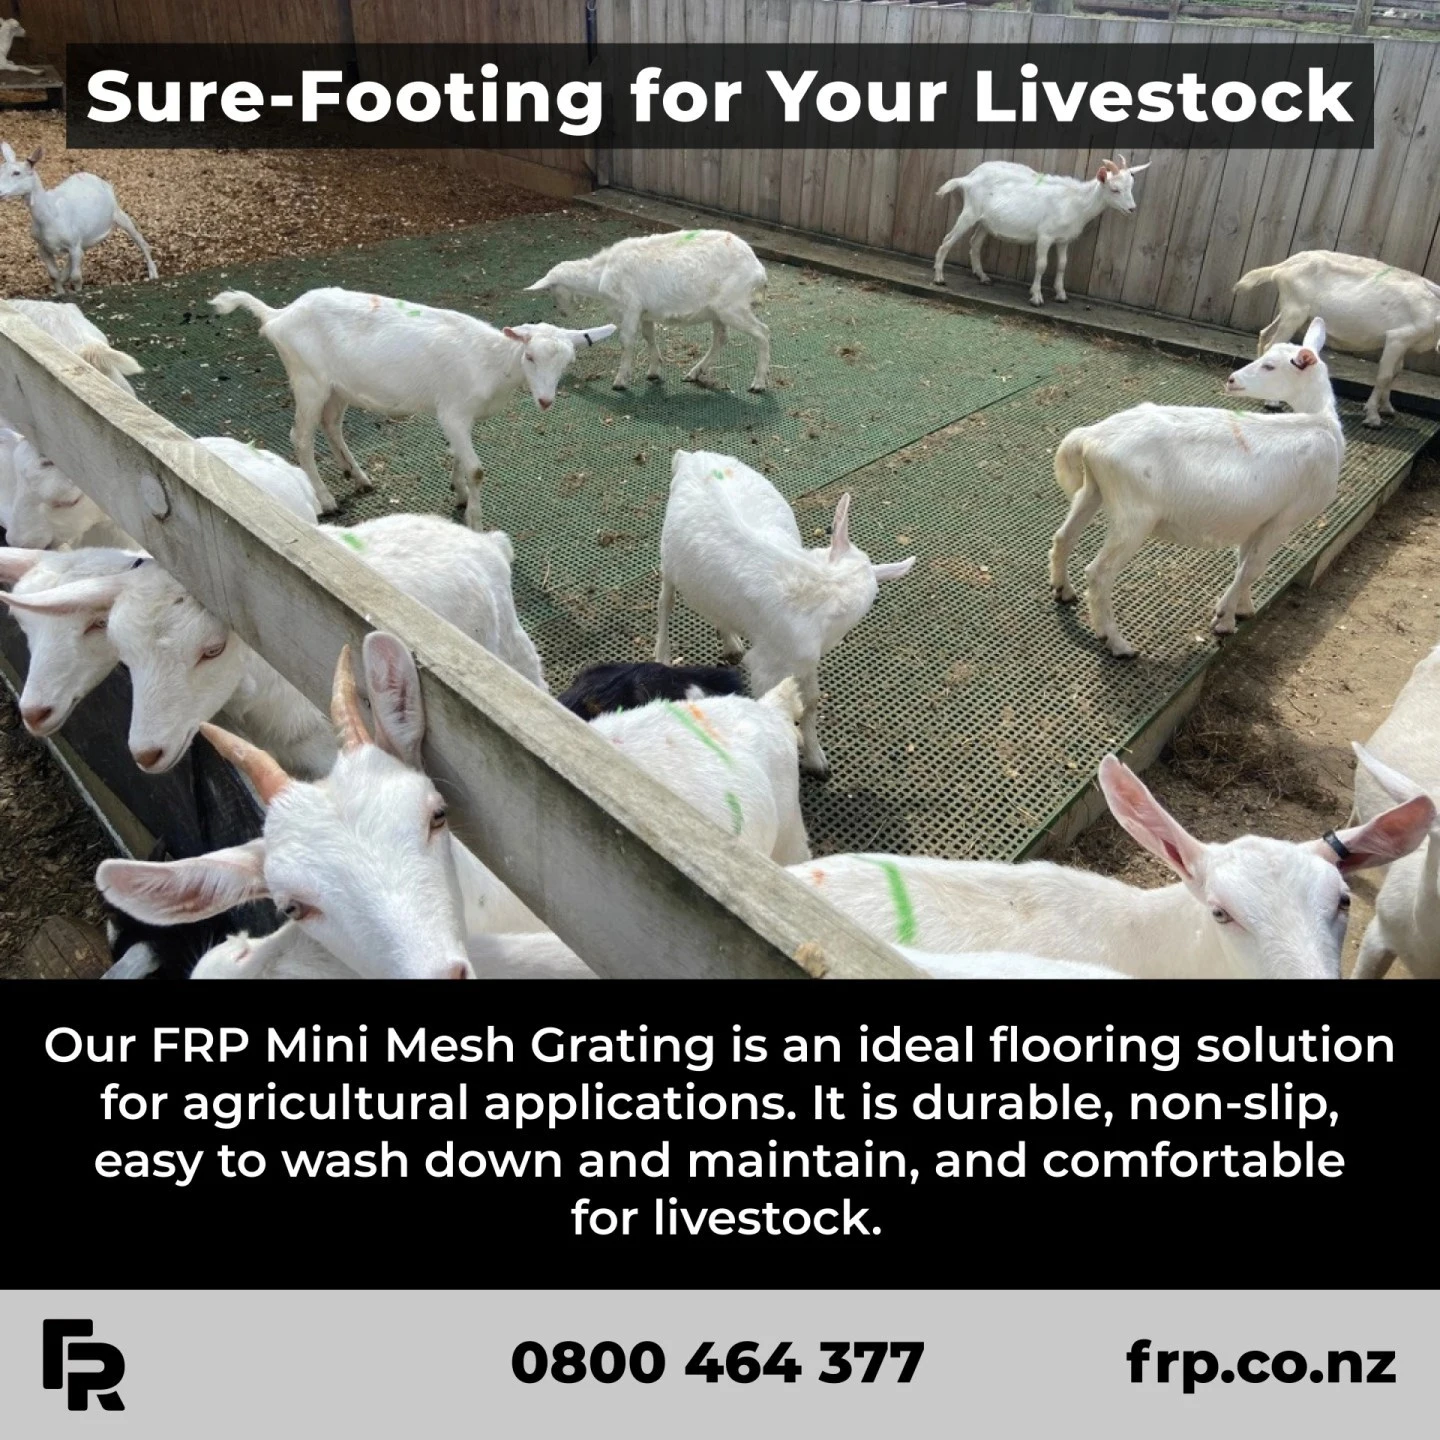 We supply a range of products ideal for agricultural environments.

#frp #frpproducts #farming #farmsnz #agriculture #nzdairy #dairyfarming #livestock